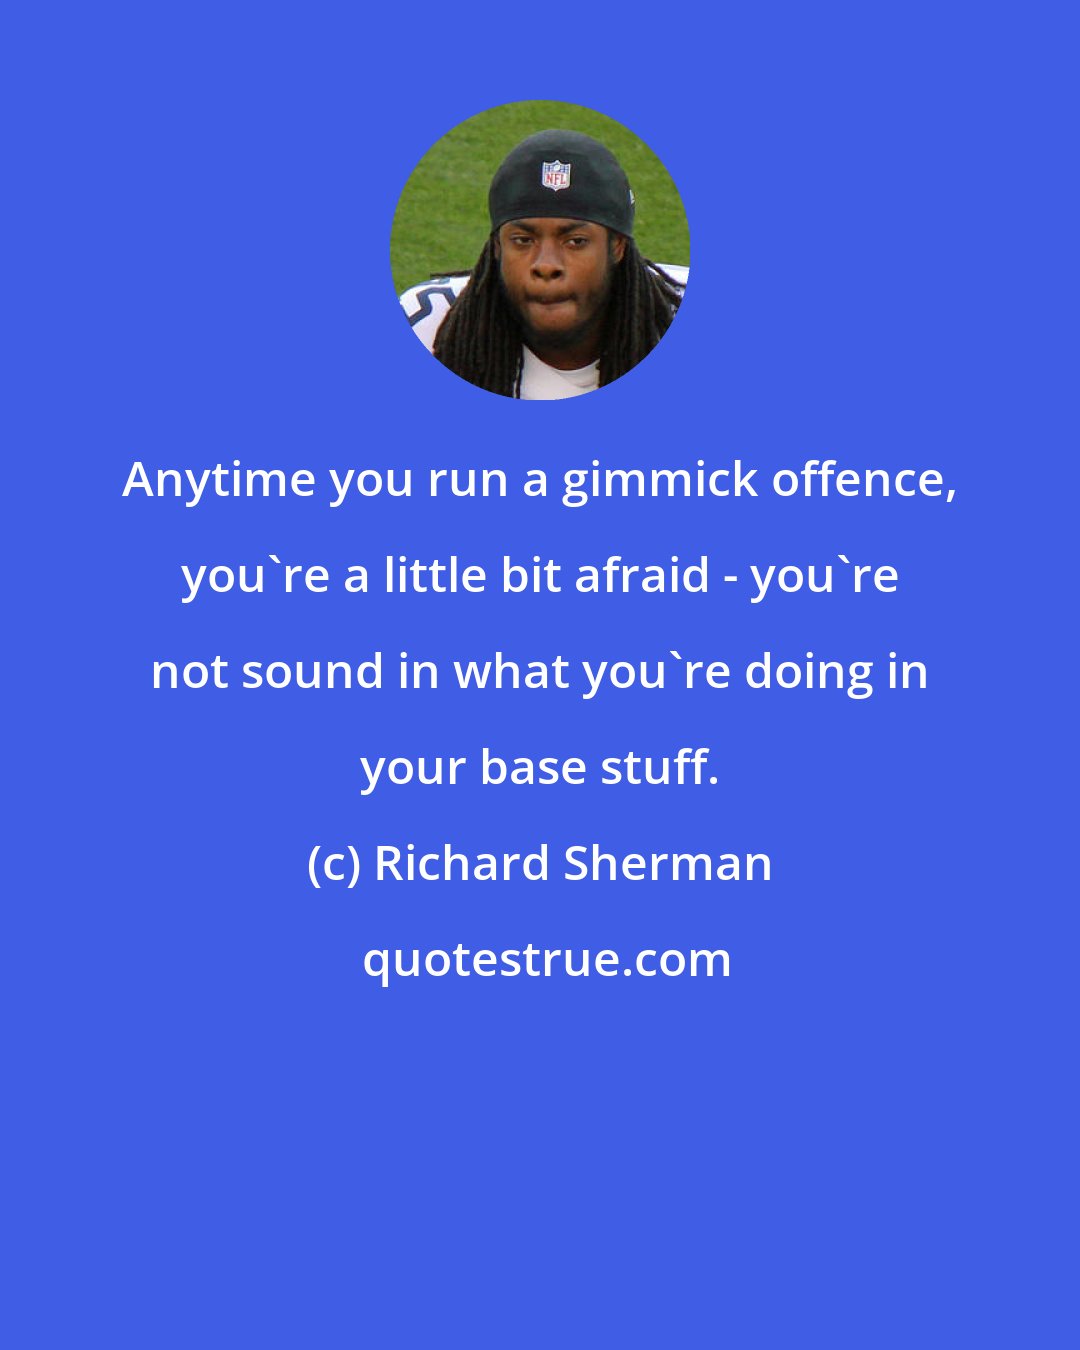 Richard Sherman: Anytime you run a gimmick offence, you're a little bit afraid - you're not sound in what you're doing in your base stuff.